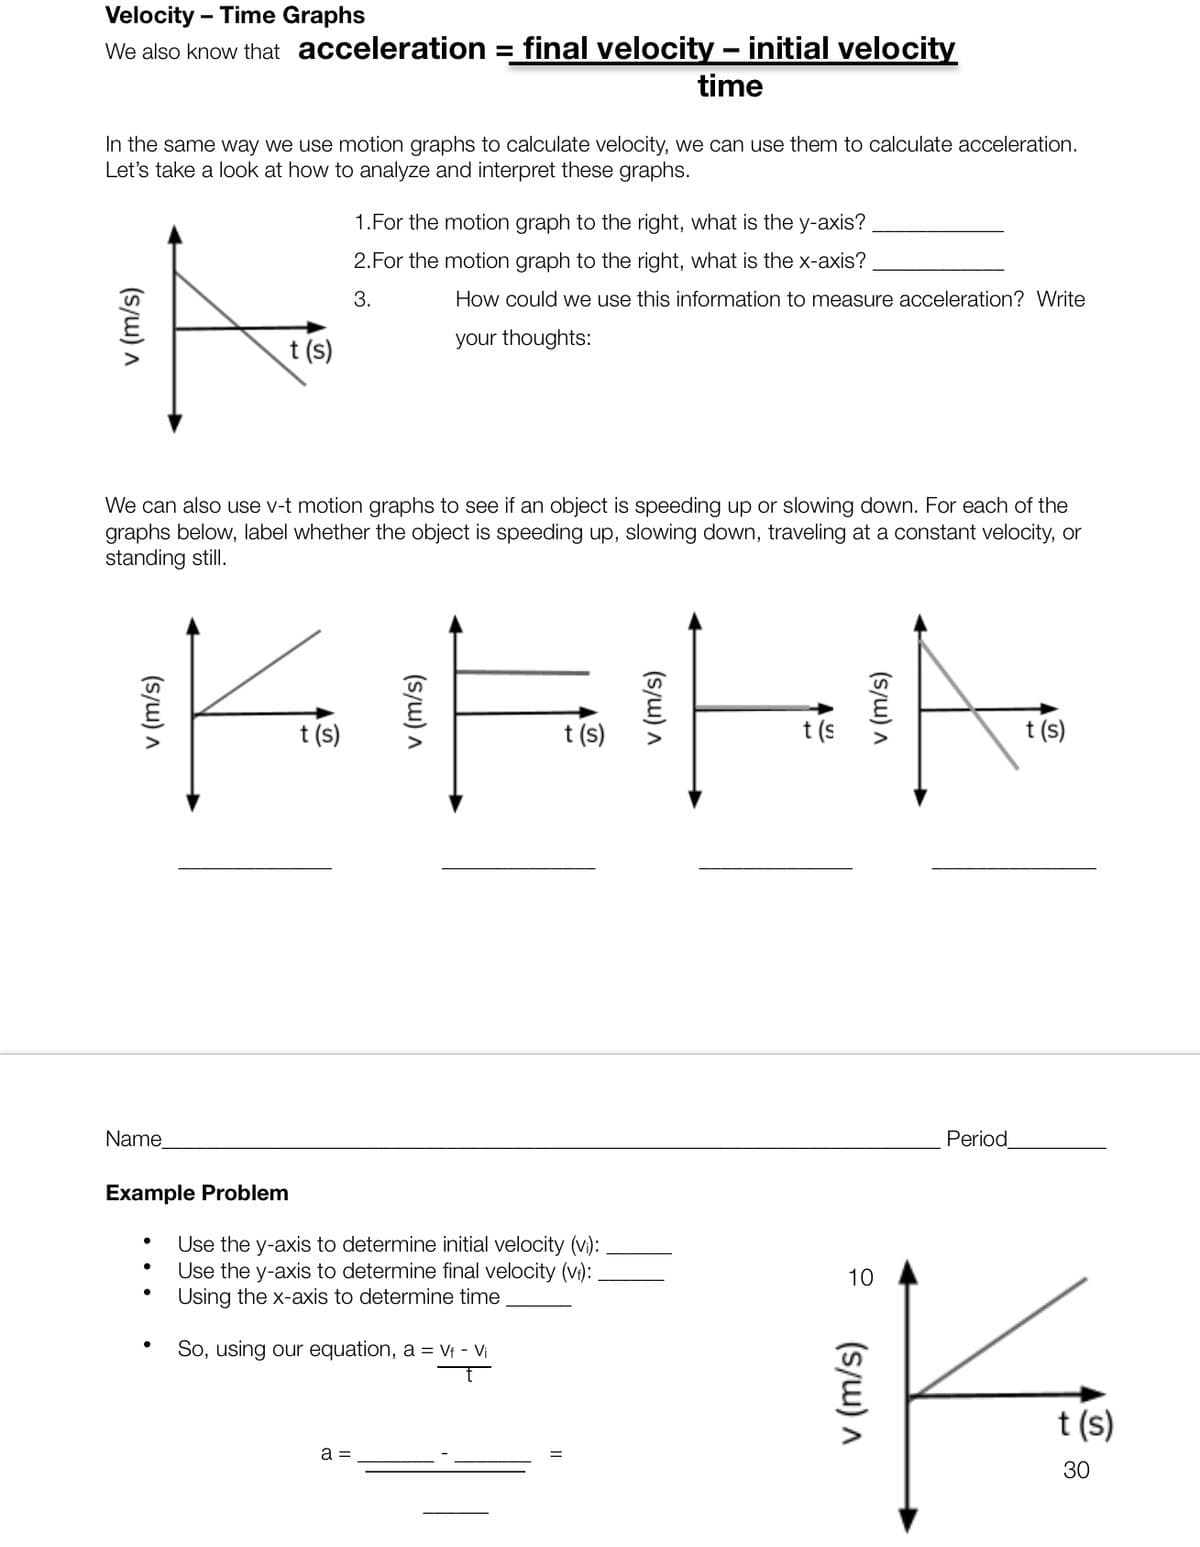 Velocity - Time Graphs
We also know that acceleration = final velocity - initial velocity
time
In the same way we use motion graphs to calculate velocity, we can use them to calculate acceleration.
Let's take a look at how to analyze and interpret these graphs.
A
t (s)
(s/w) A
Name
We can also use v-t motion graphs to see if an object is speeding up or slowing down. For each of the
graphs below, label whether the object is speeding up, slowing down, traveling at a constant velocity, or
standing still.
Example Problem
t (s)
1.For the motion graph to the right, what is the y-axis?
2. For the motion graph to the right, what is the x-axis?
3.
How could we use this information to measure acceleration? Write
your thoughts:
a =
t (s)
Use the y-axis to determine initial velocity (vi):
Use the y-axis to determine final velocity (v₁):
Using the x-axis to determine time
So, using our equation, a = vf - Vi
t (s
Period
(s/w) A
t (s)
10
ik
t (s)
30